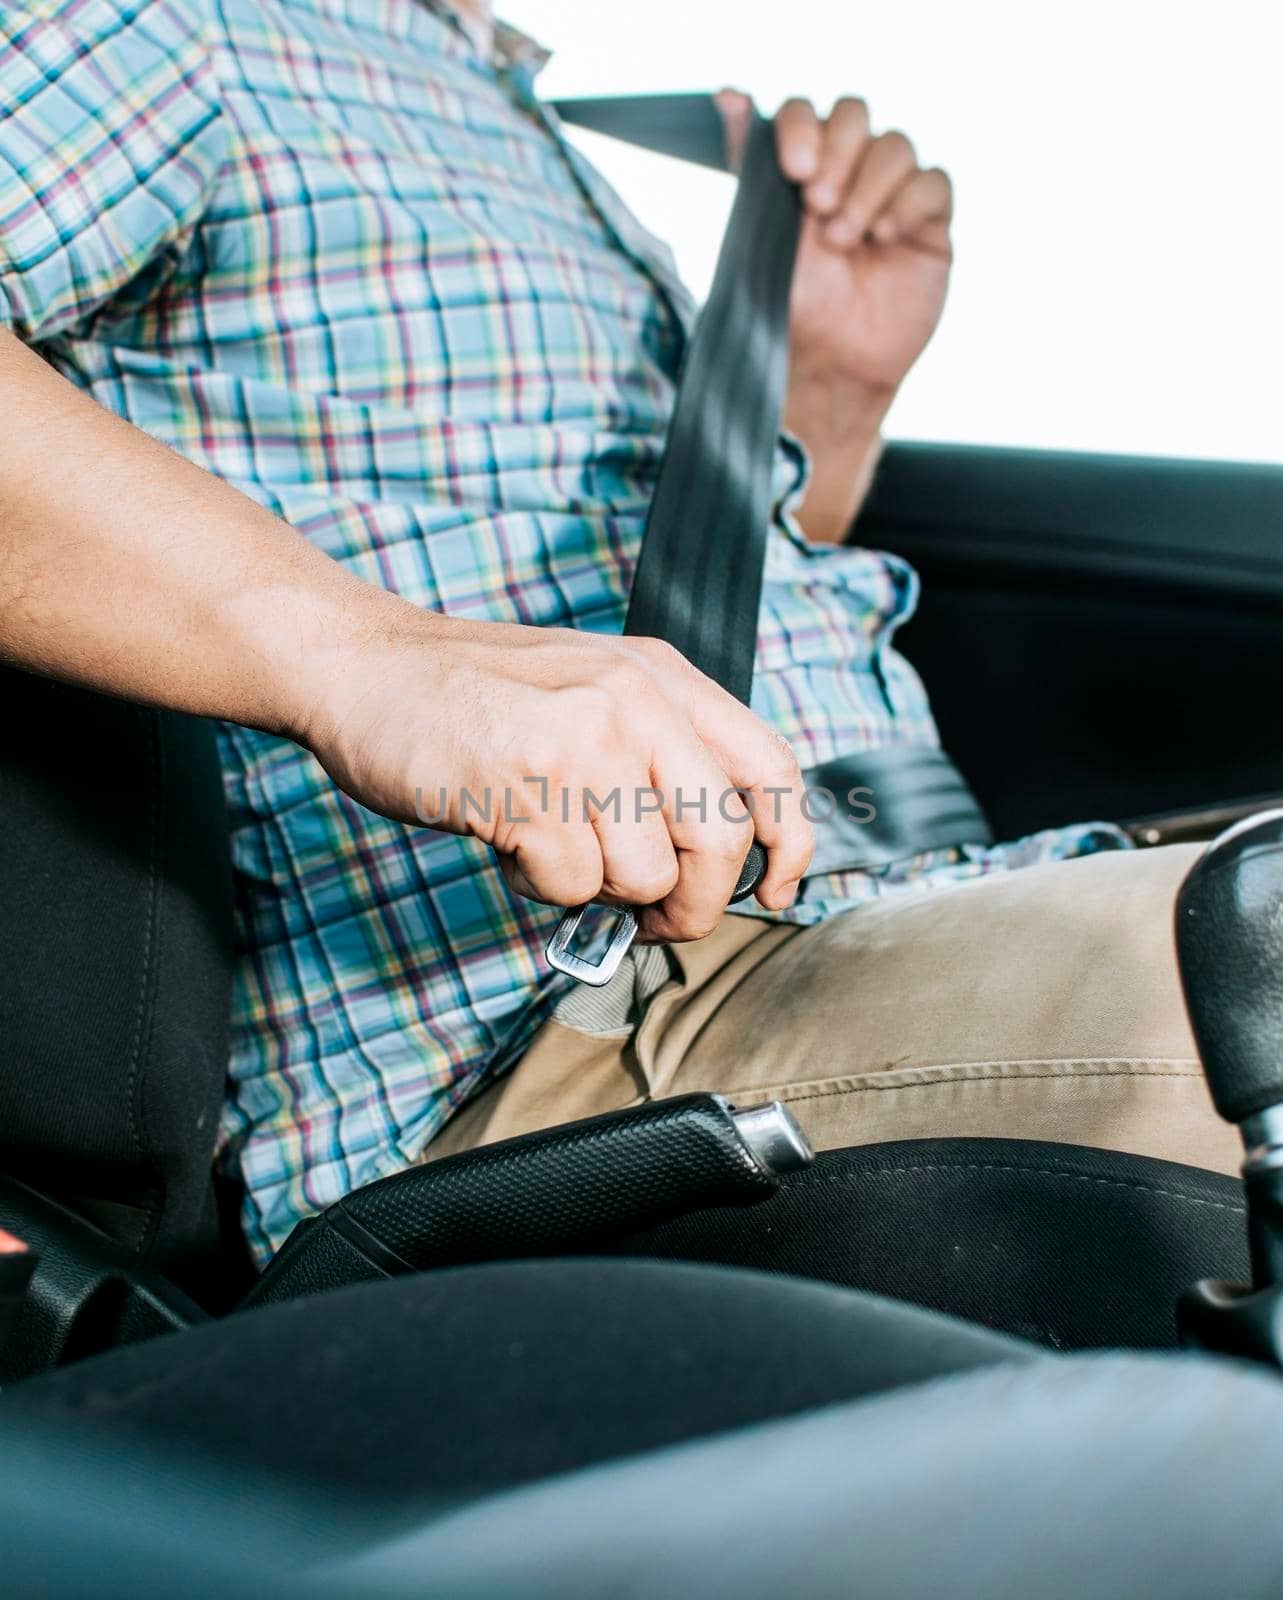 Driver hands fastening the seat belt, Close up of person hands putting on the seat belt. Driver's hands putting on the seat belt. Safety belt for accident prevention by isaiphoto